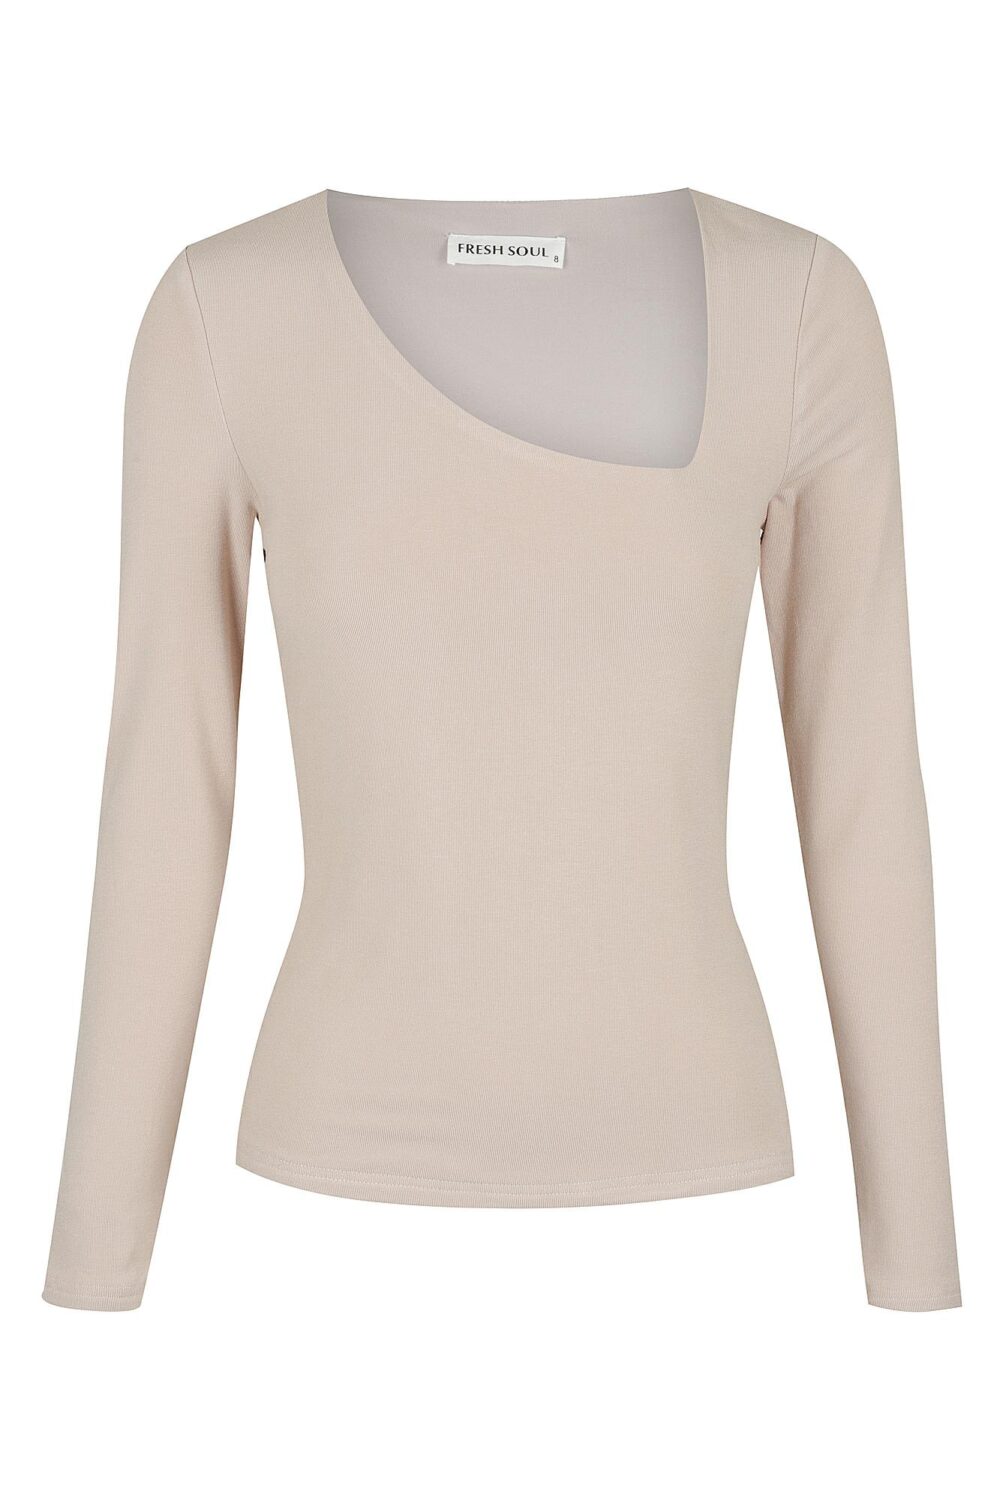 Ladies Top Colour is Oatmeal